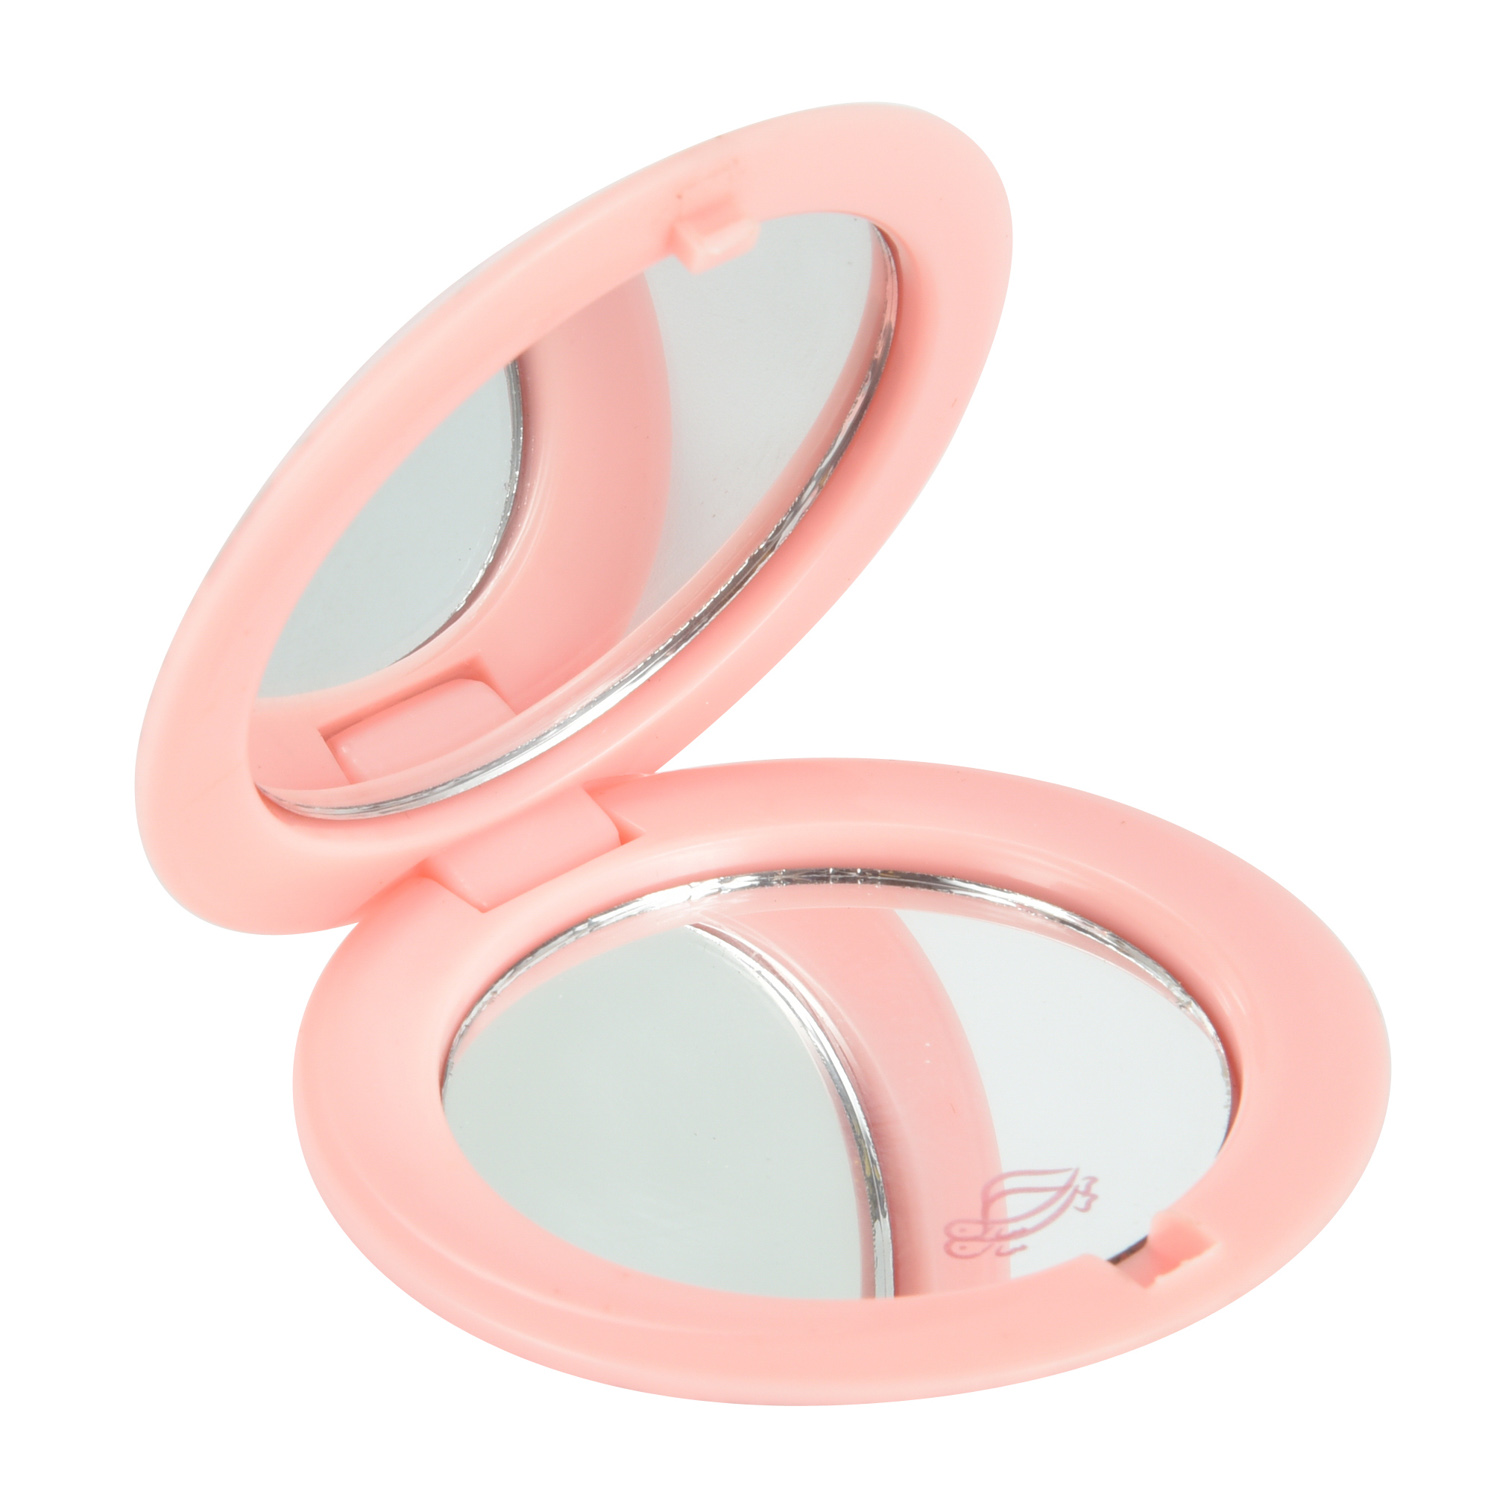 Round compact foldable mirror